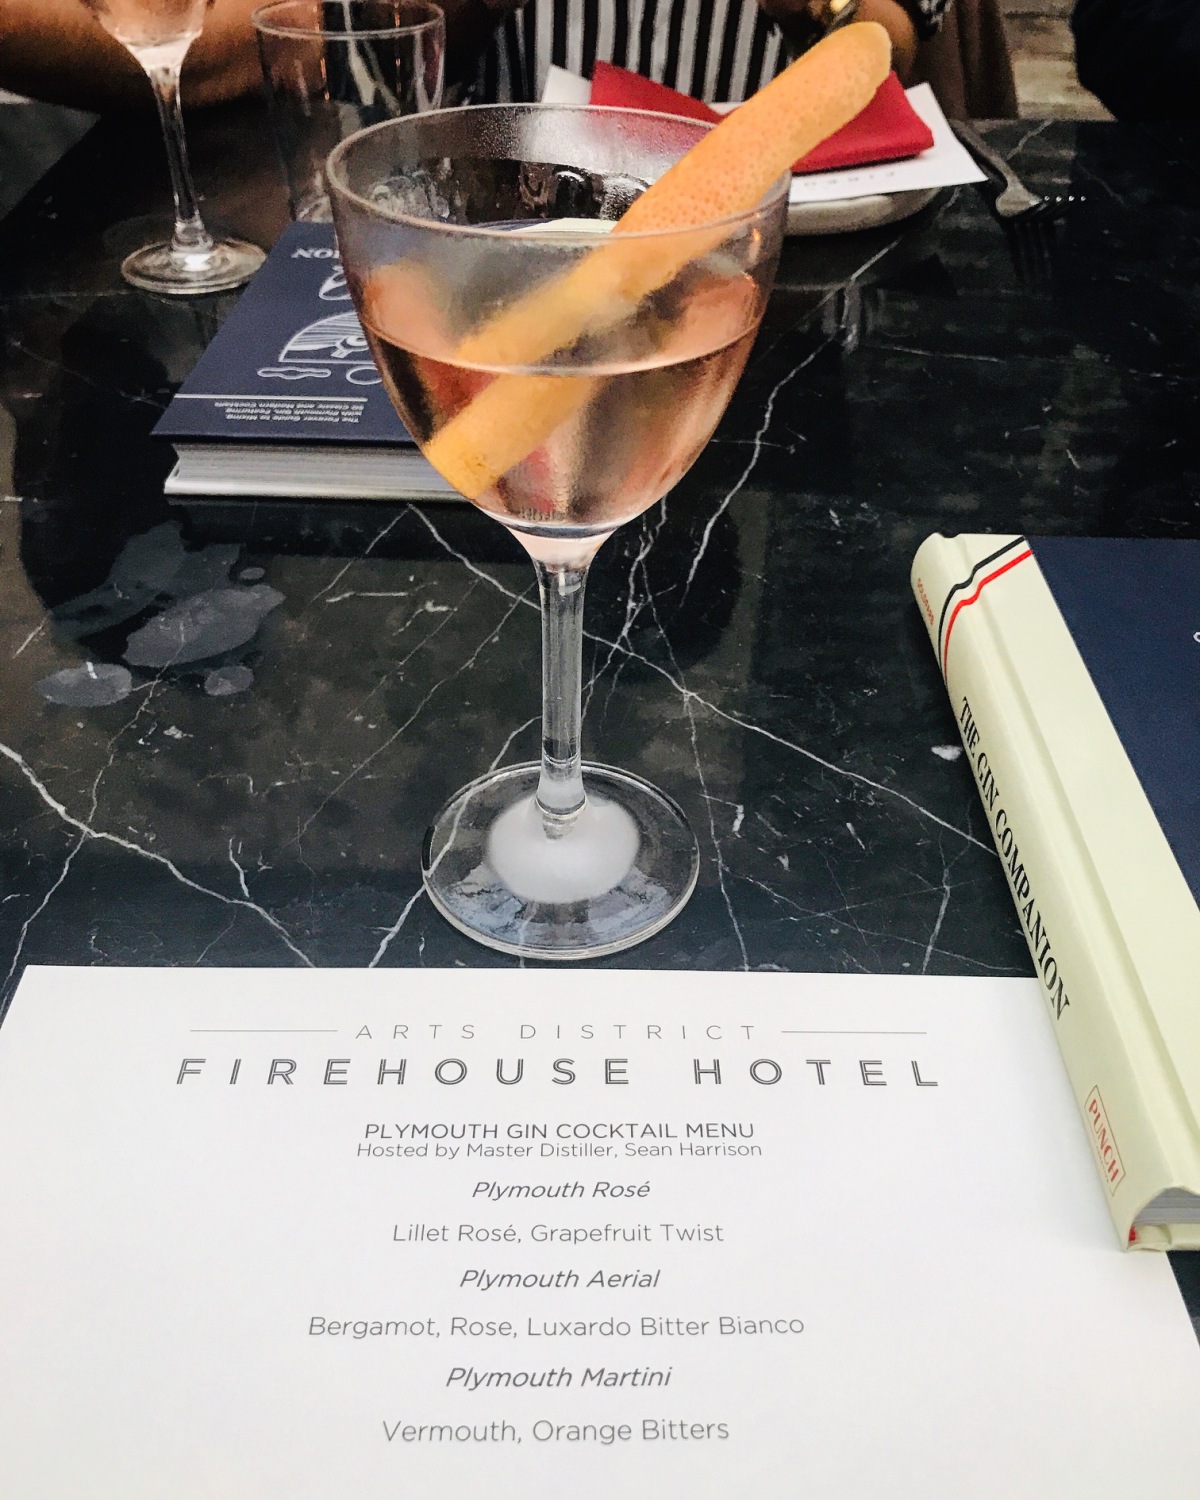 Dine, Drink & Dwell at Arts District Firehouse Restaurant